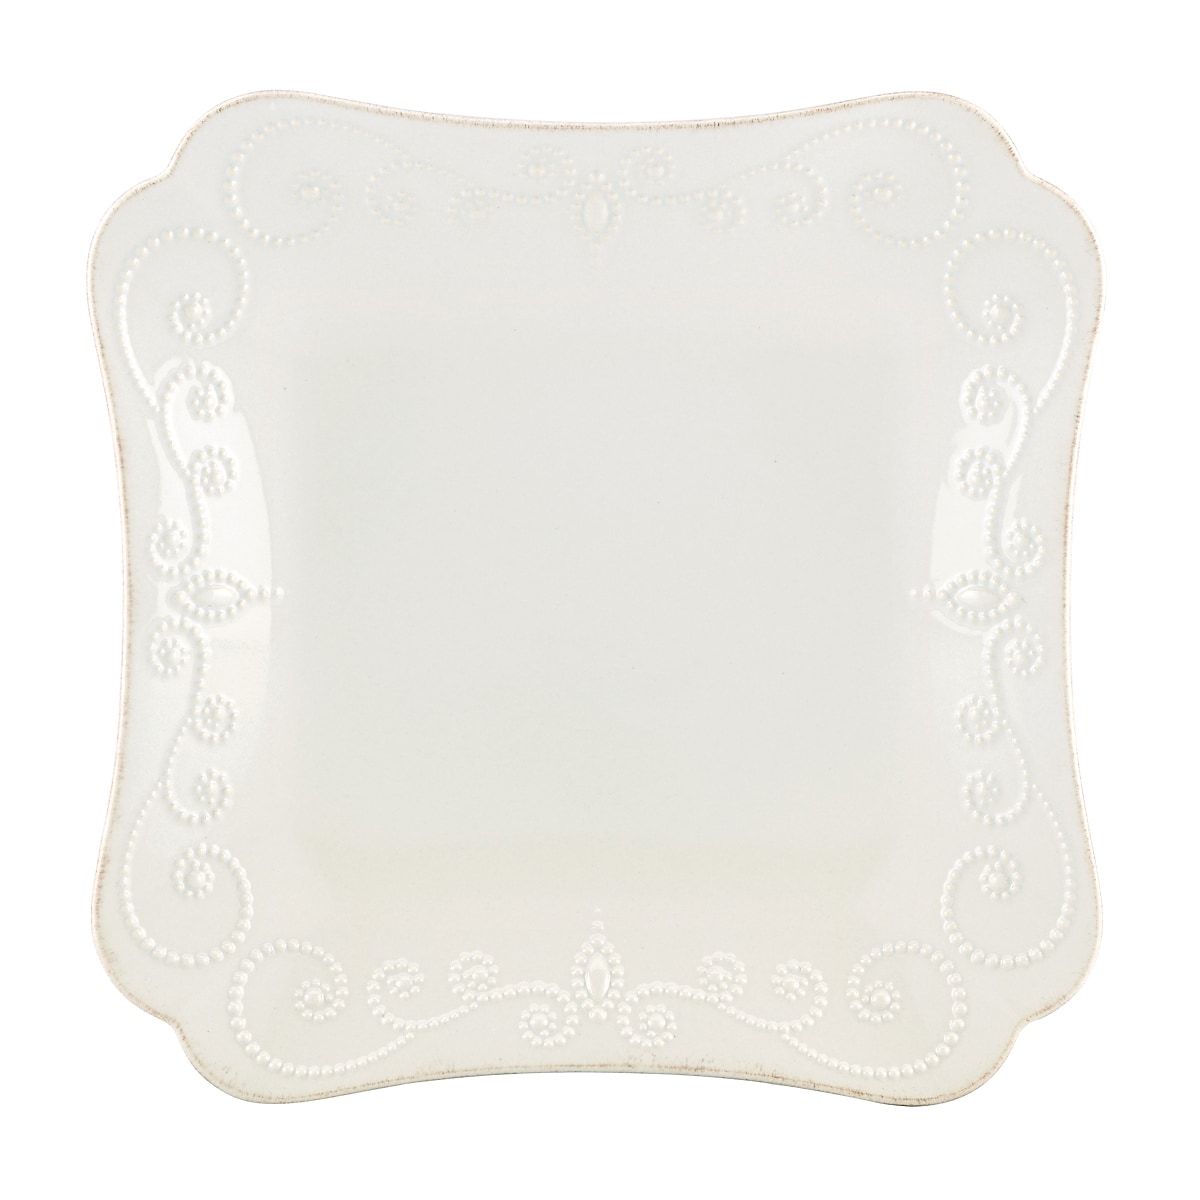 Lenox White French Perle Square Dinner Plate